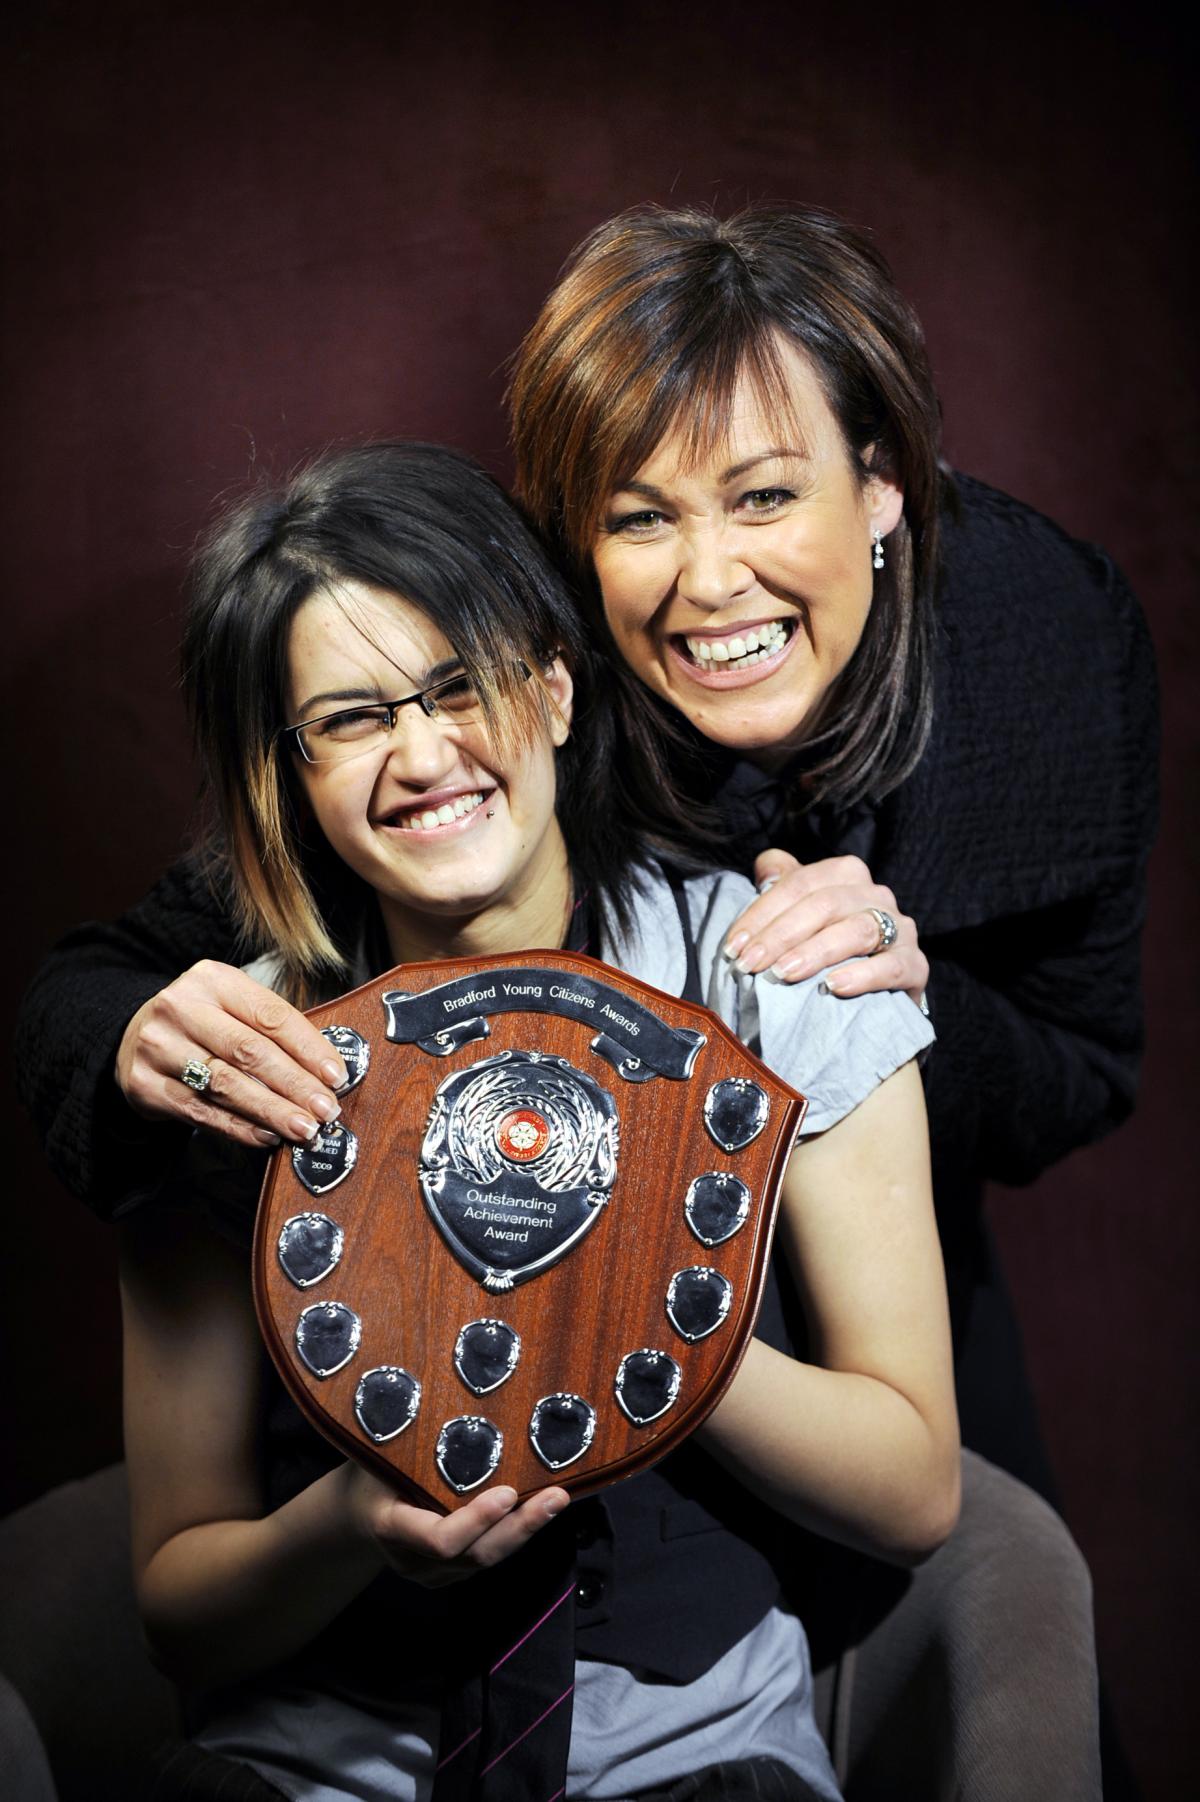 Mariam Ahmed, winner of the Outstanding Achievement Award, with Christa Ackroyd